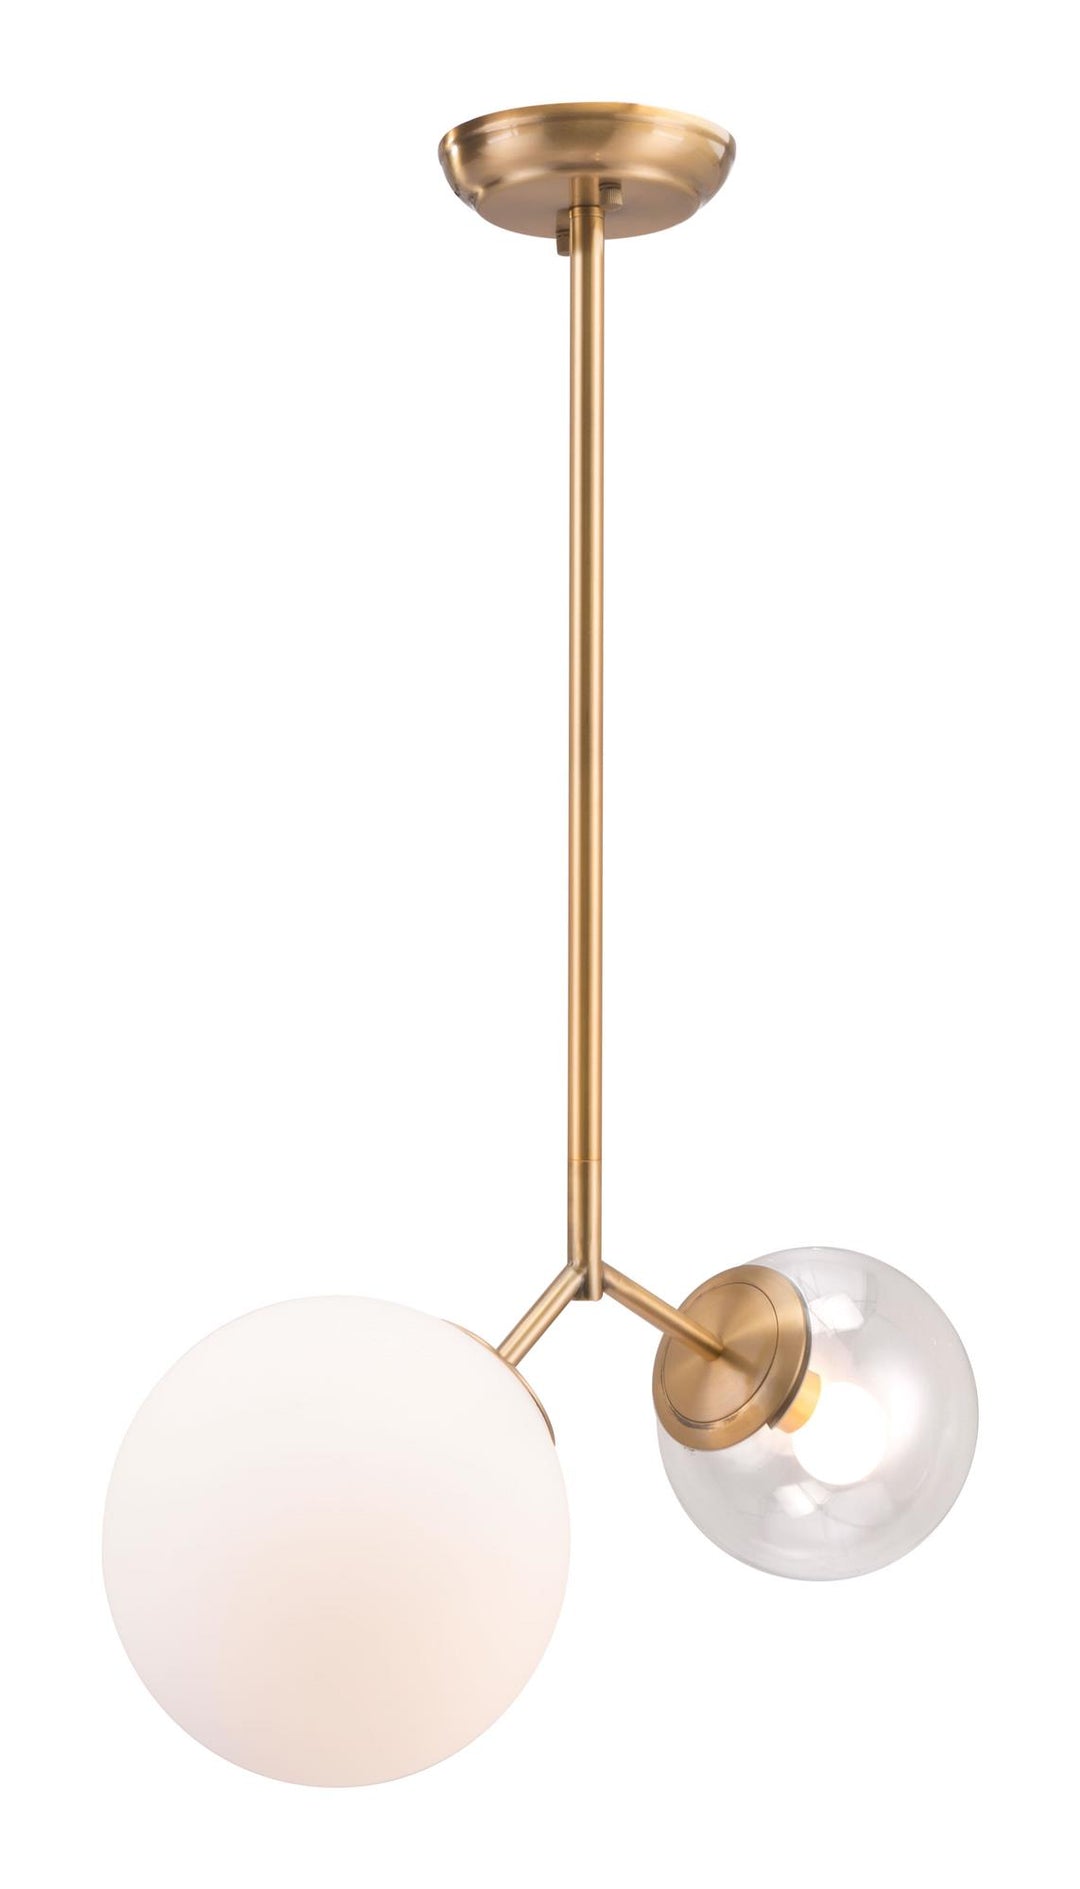 Ceiling fixture by Constance suitable for different room heights -  N/A